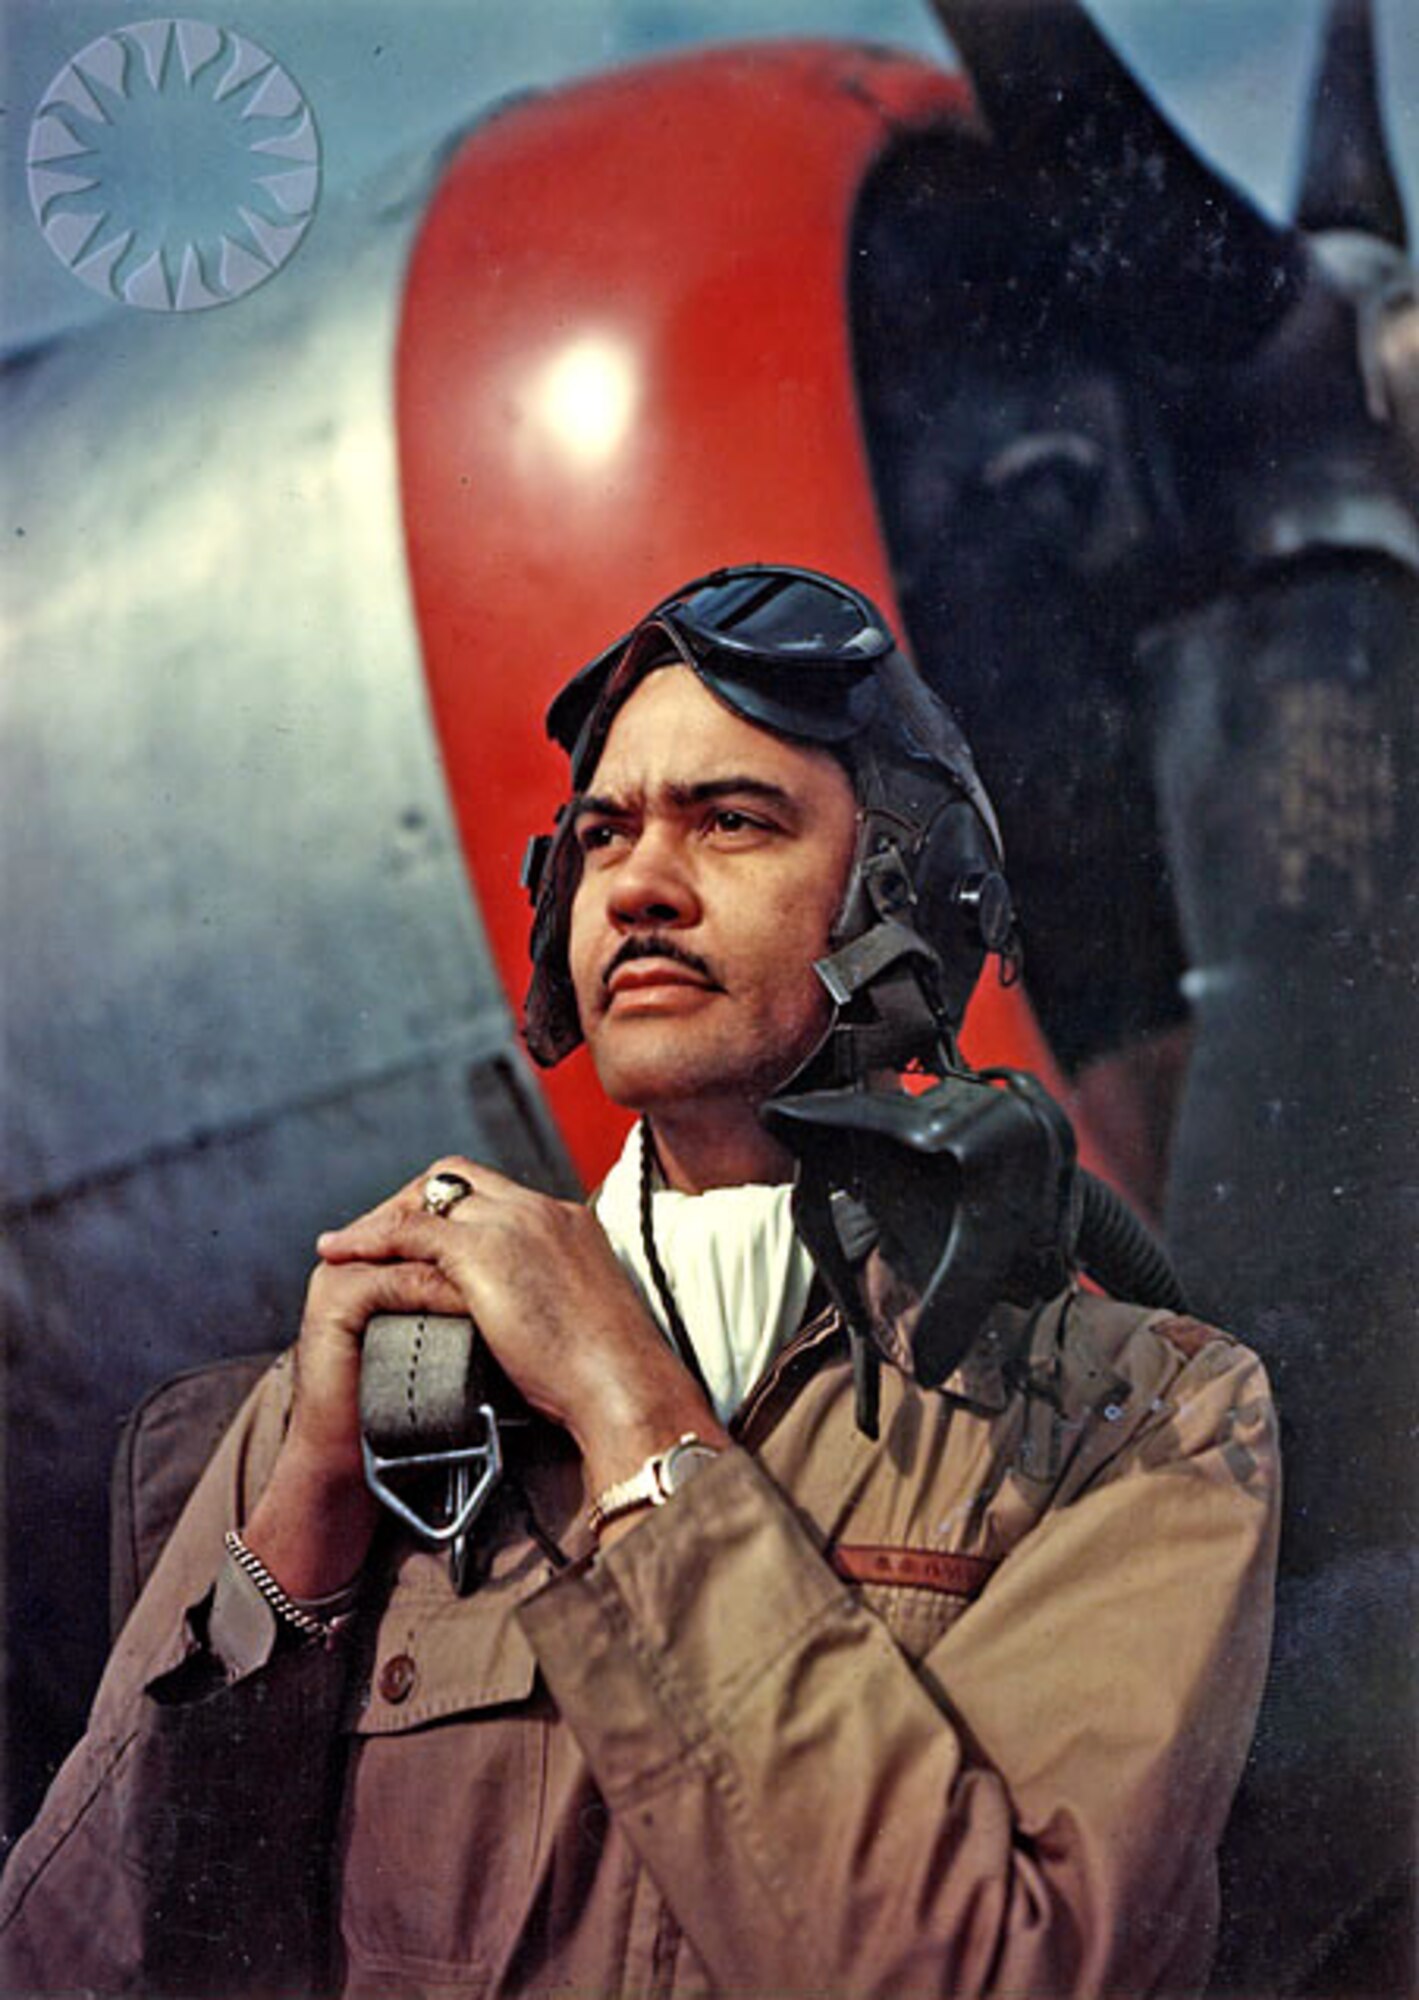 General Benjamin O. Davis, Jr. was the commander of the World War II Tuskegee Airmen. He is also known for being the first African-American general officer in the U.S. Air Force.